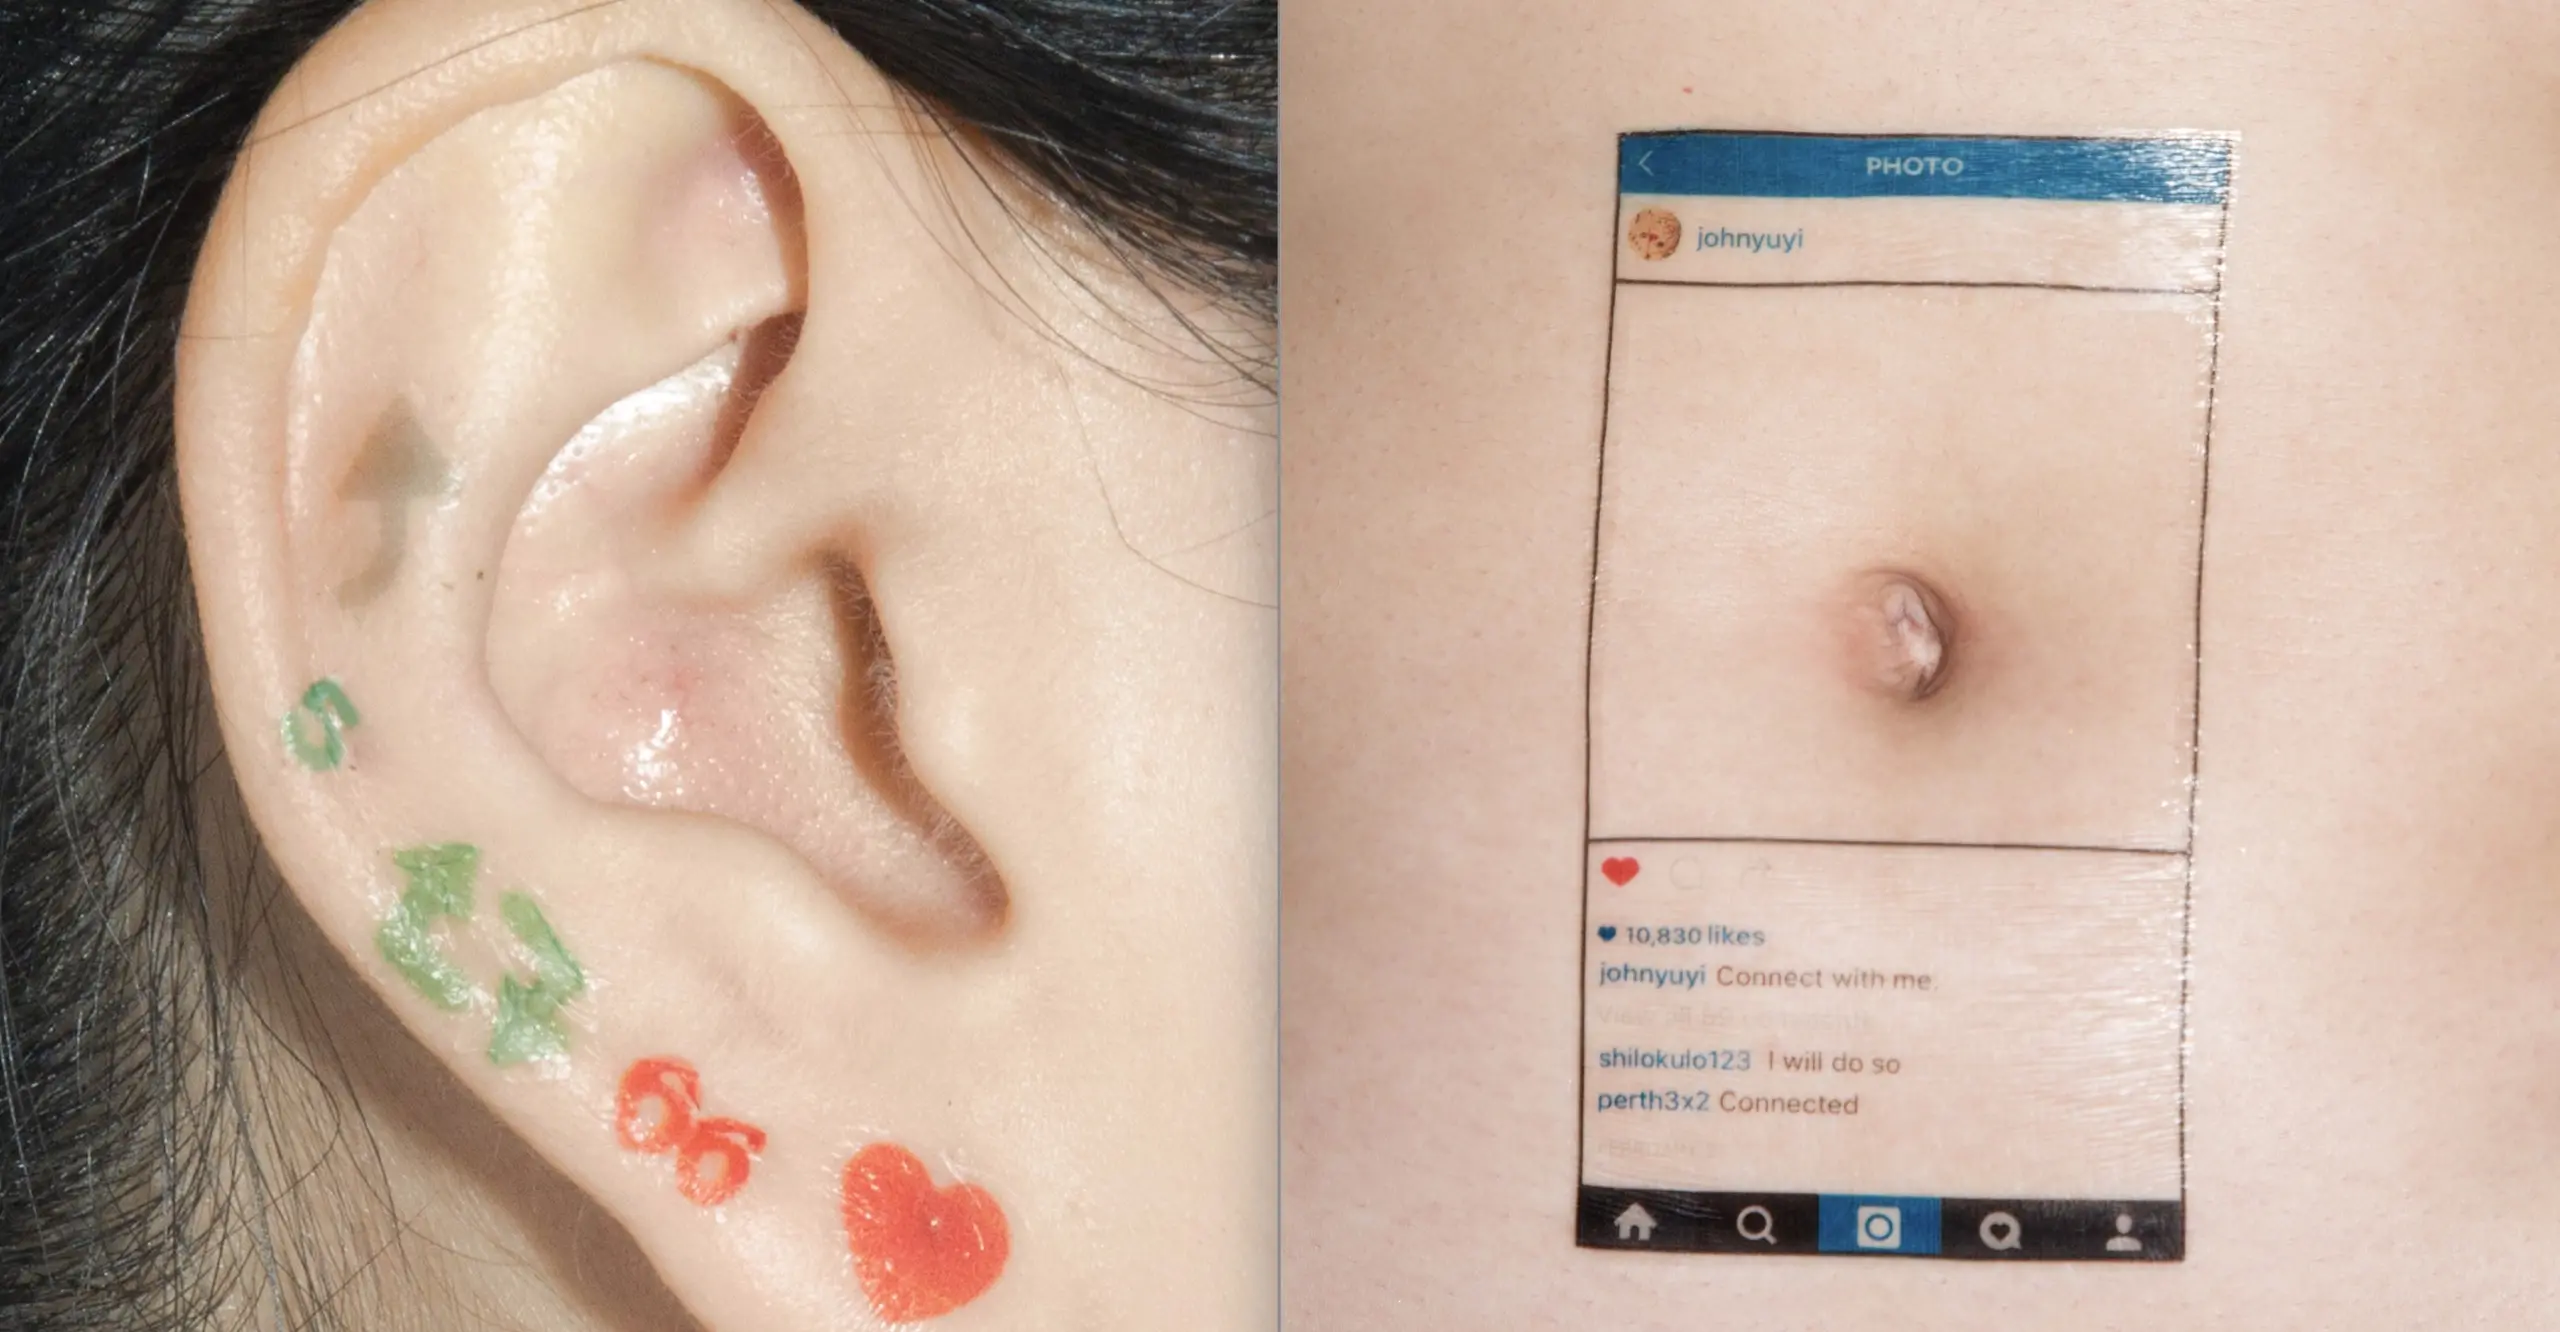 Two close up images: (1) an ear with various emojis hand drawn along the lobe; (2) belly button framed with a hand drawn instagram border